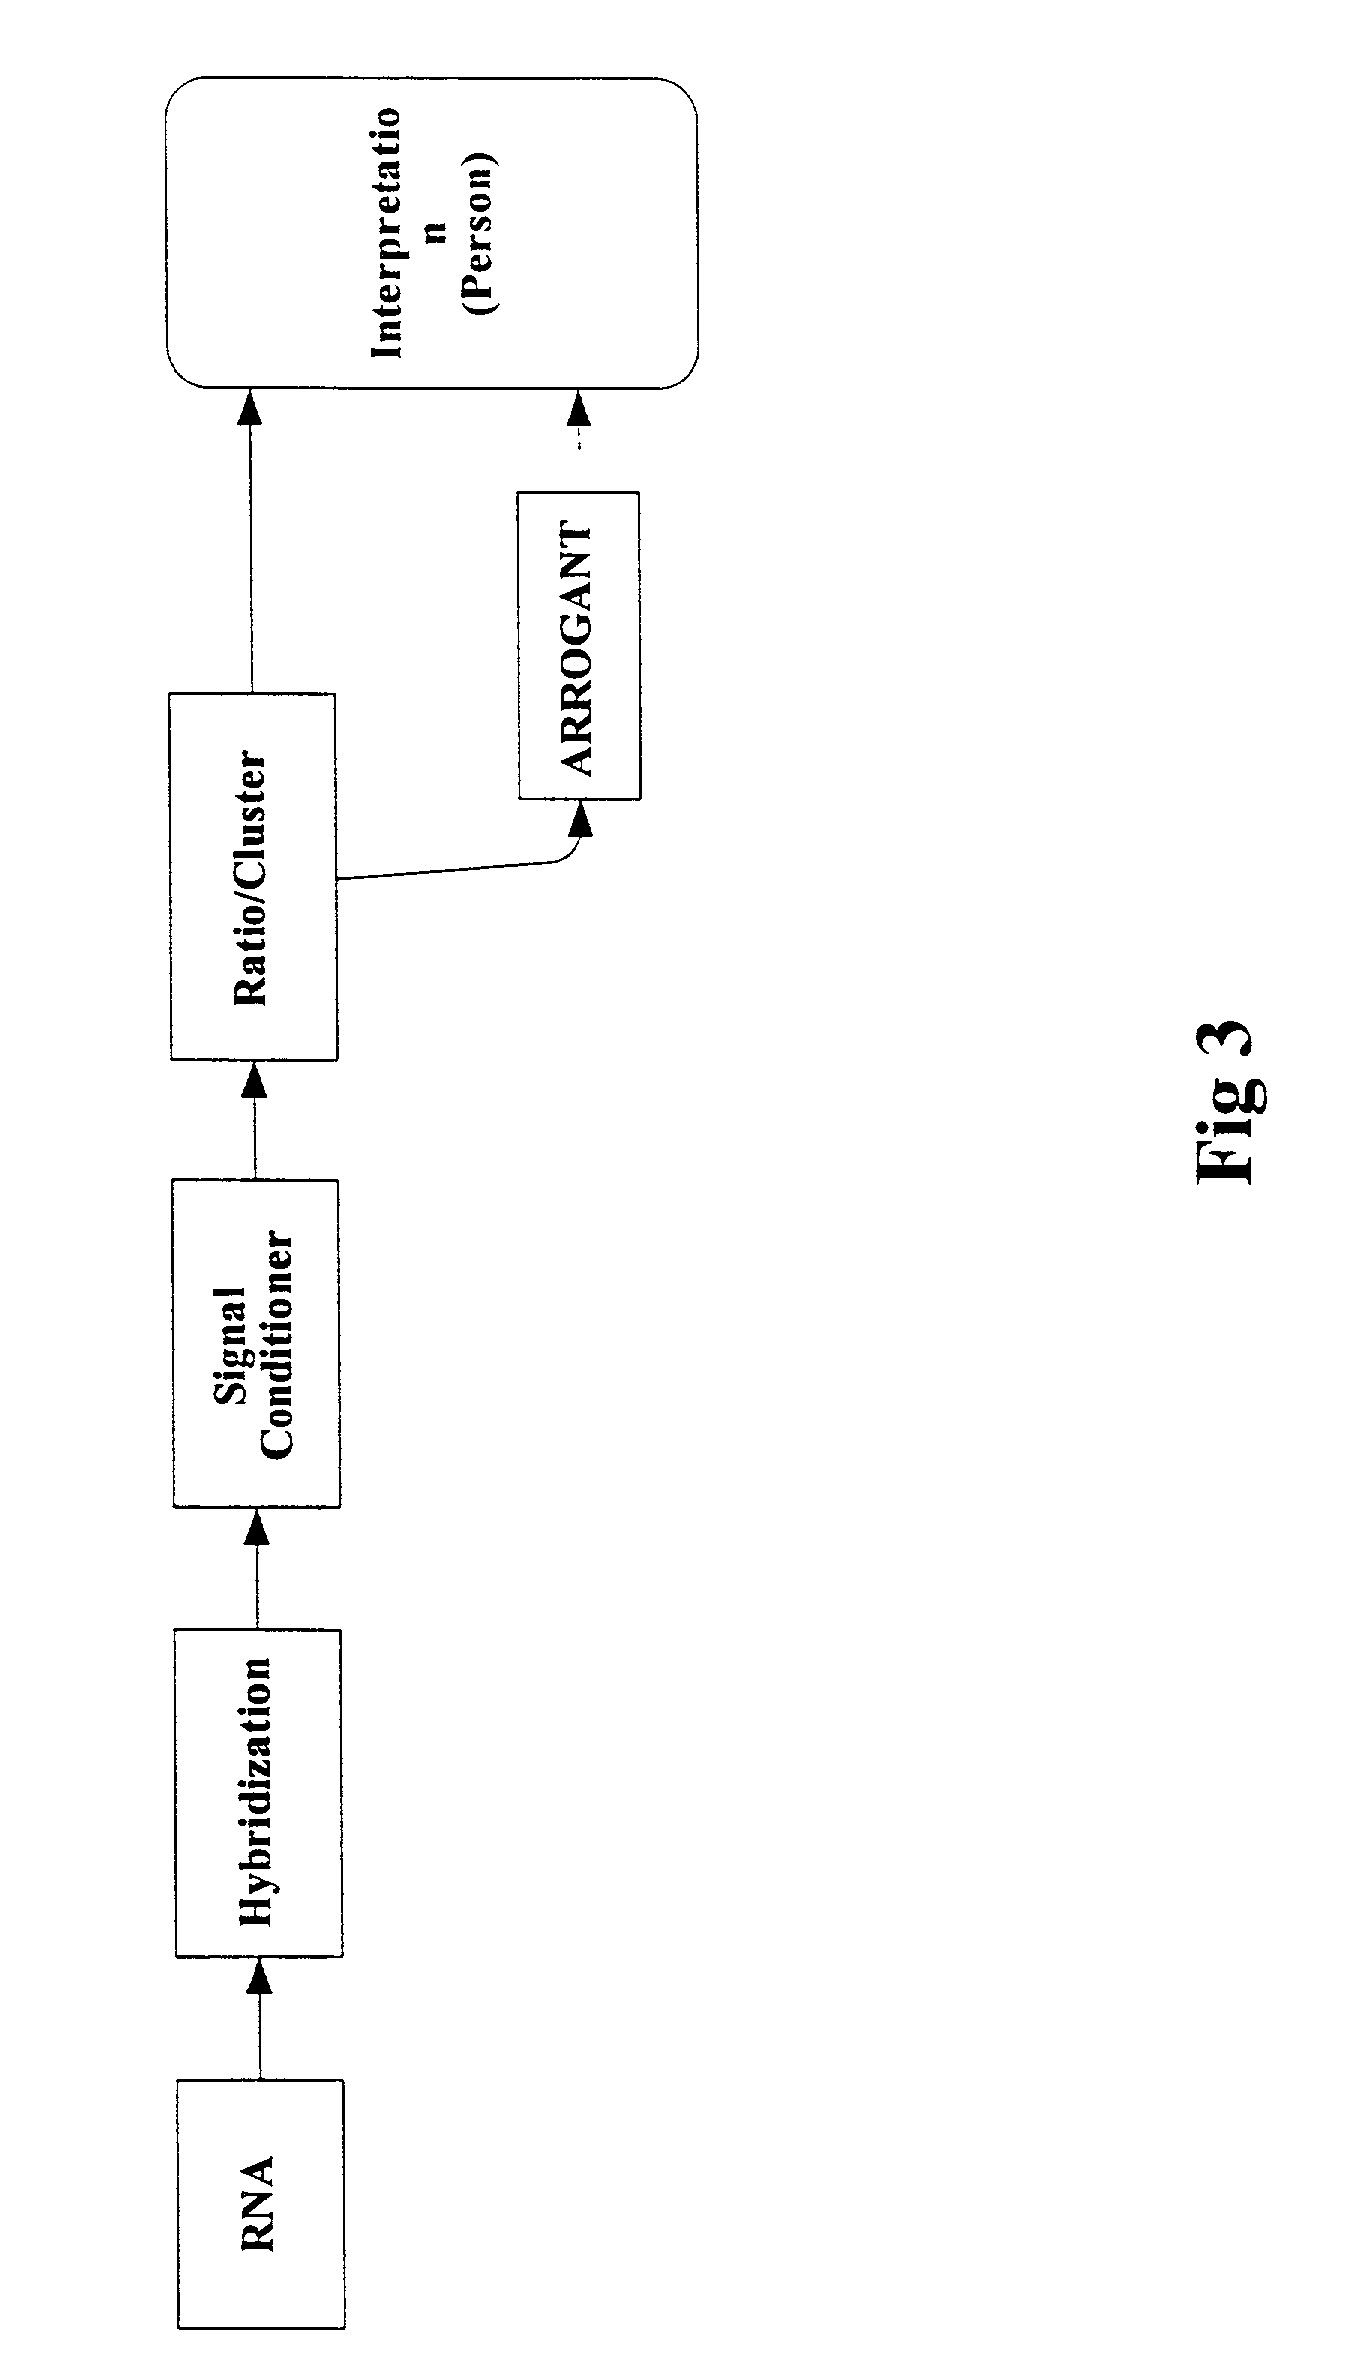 Computer-based method for creating collections of sequences from a dataset of sequence identifiers corresponding to natural complex biopolymer sequences and linked to corresponding annotations